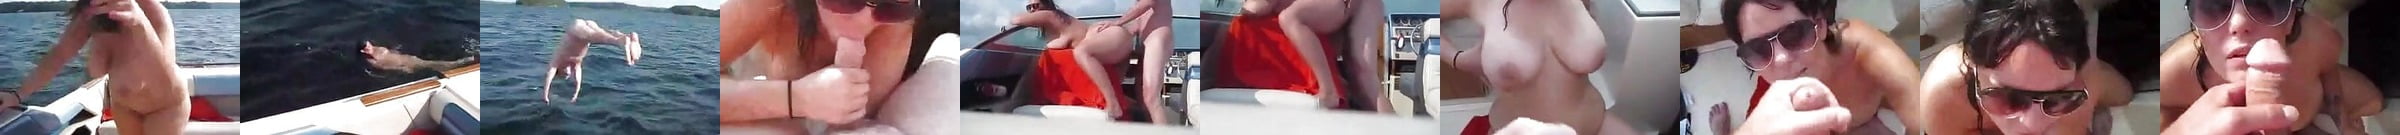 Featured Boat Sex Party Porn Videos Xhamster